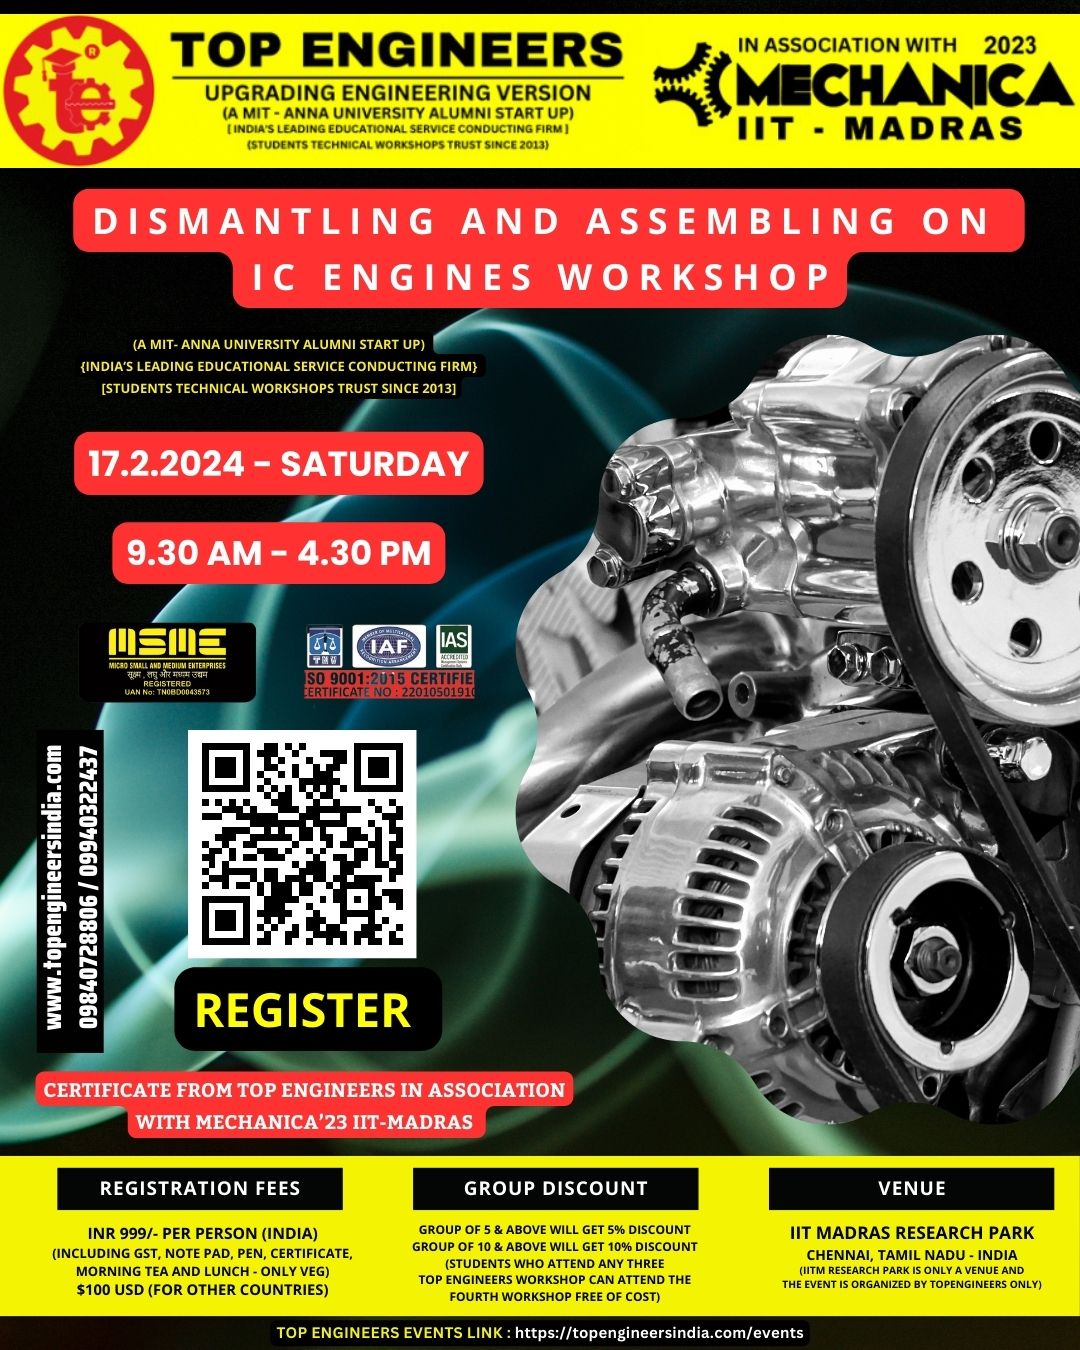 Dismantling and Assembling on IC Engines Workshop 2024